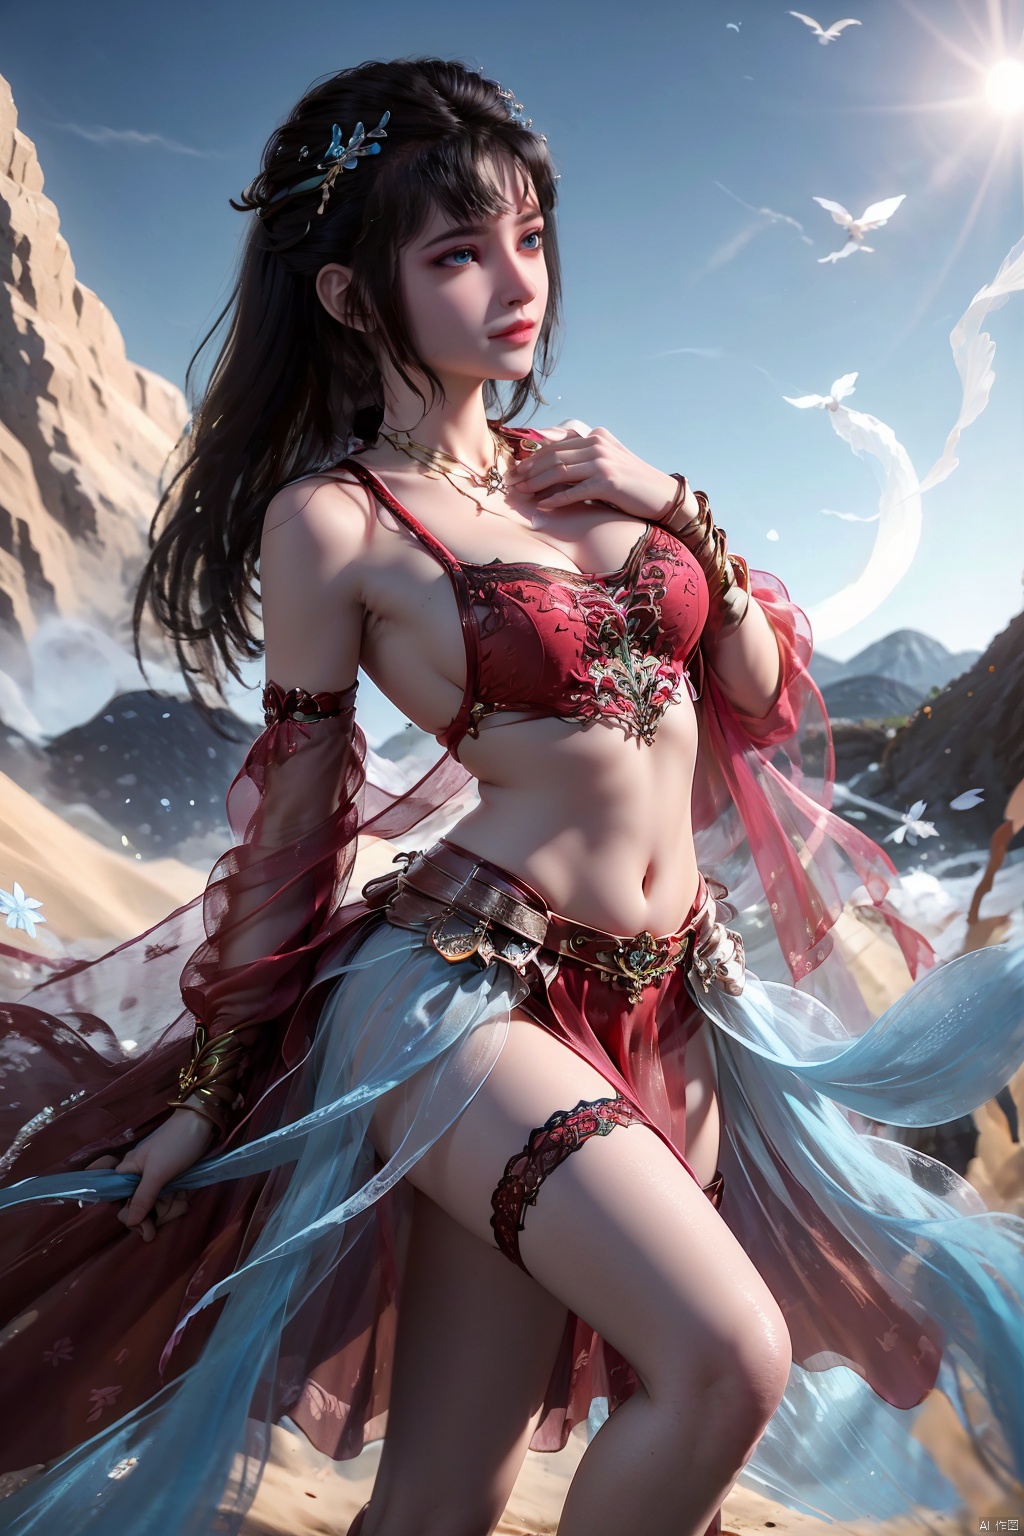 A girl with long black hair, meDium breasts, wunv, breasts, upper boDy, Delicate makeup, looking at, long flowing hair, shallow smile, Above the knee, look up at the camera, appear on the camera, siDe light shining on the face, clear, blue sky, Desert, 1 girl stanDing, you neeD to see her face, Sky blue wiDe sleeve fairy Dress, above knee, look lens, multi-camera, Dance, multi-pose, multi-camera, boDy front, hair accessories, black hair, blue eyes, Jewelry necklace, bracelet, shot from the front, perfect boDy, 34D bust, reD bellybanD, clear fingers, long legs, black stockings, high heels, Fluttering snowflakes, flying sleeves, HD picture quality, 8k picture quality, professional photography, professional lighting, 3D effect